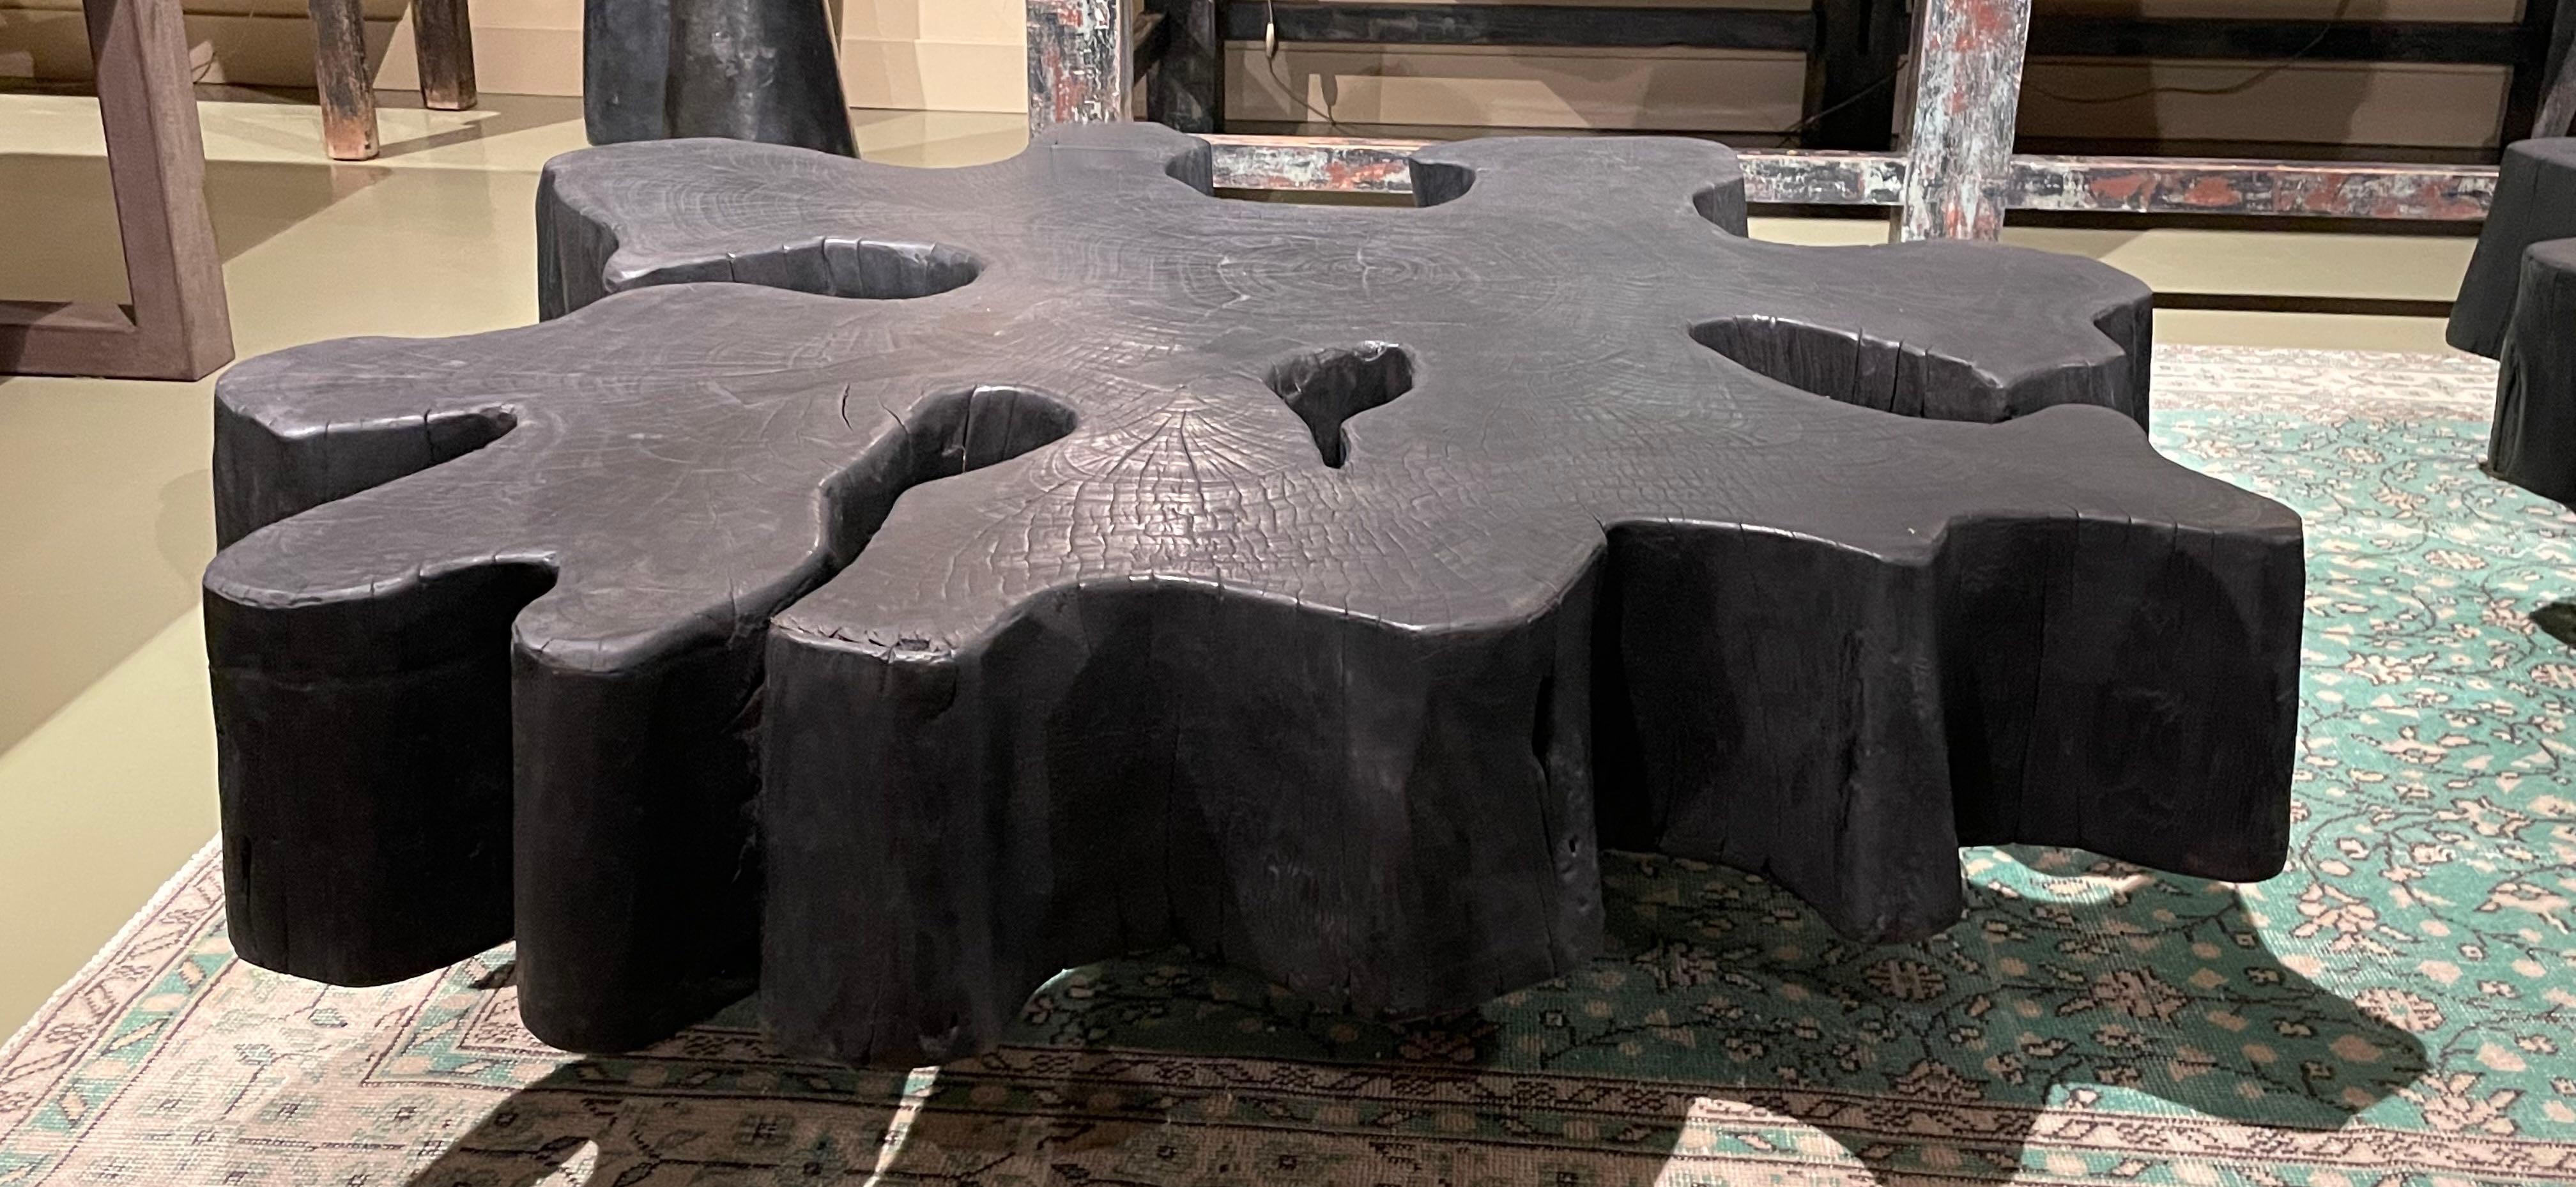 Indonesian Ebonized Organic Free Form Coffee Table, Indonesia, Contemporary For Sale